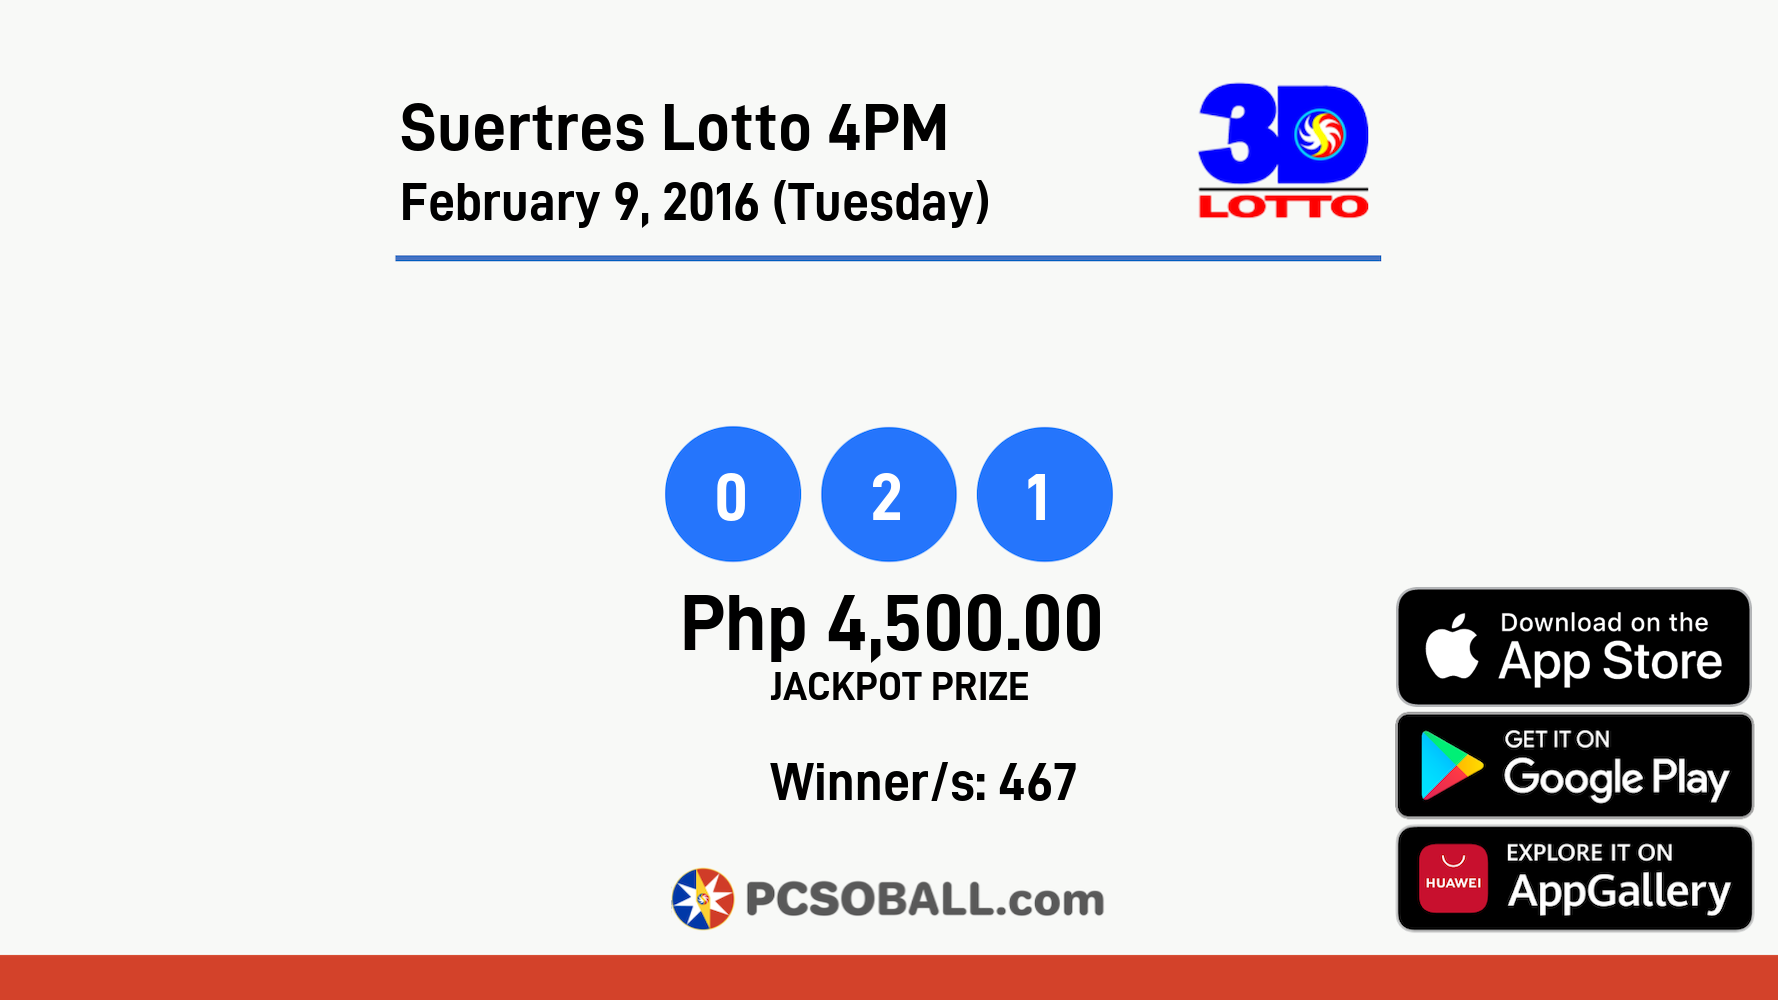 Suertres Lotto 4PM February 9, 2016 (Tuesday) Result